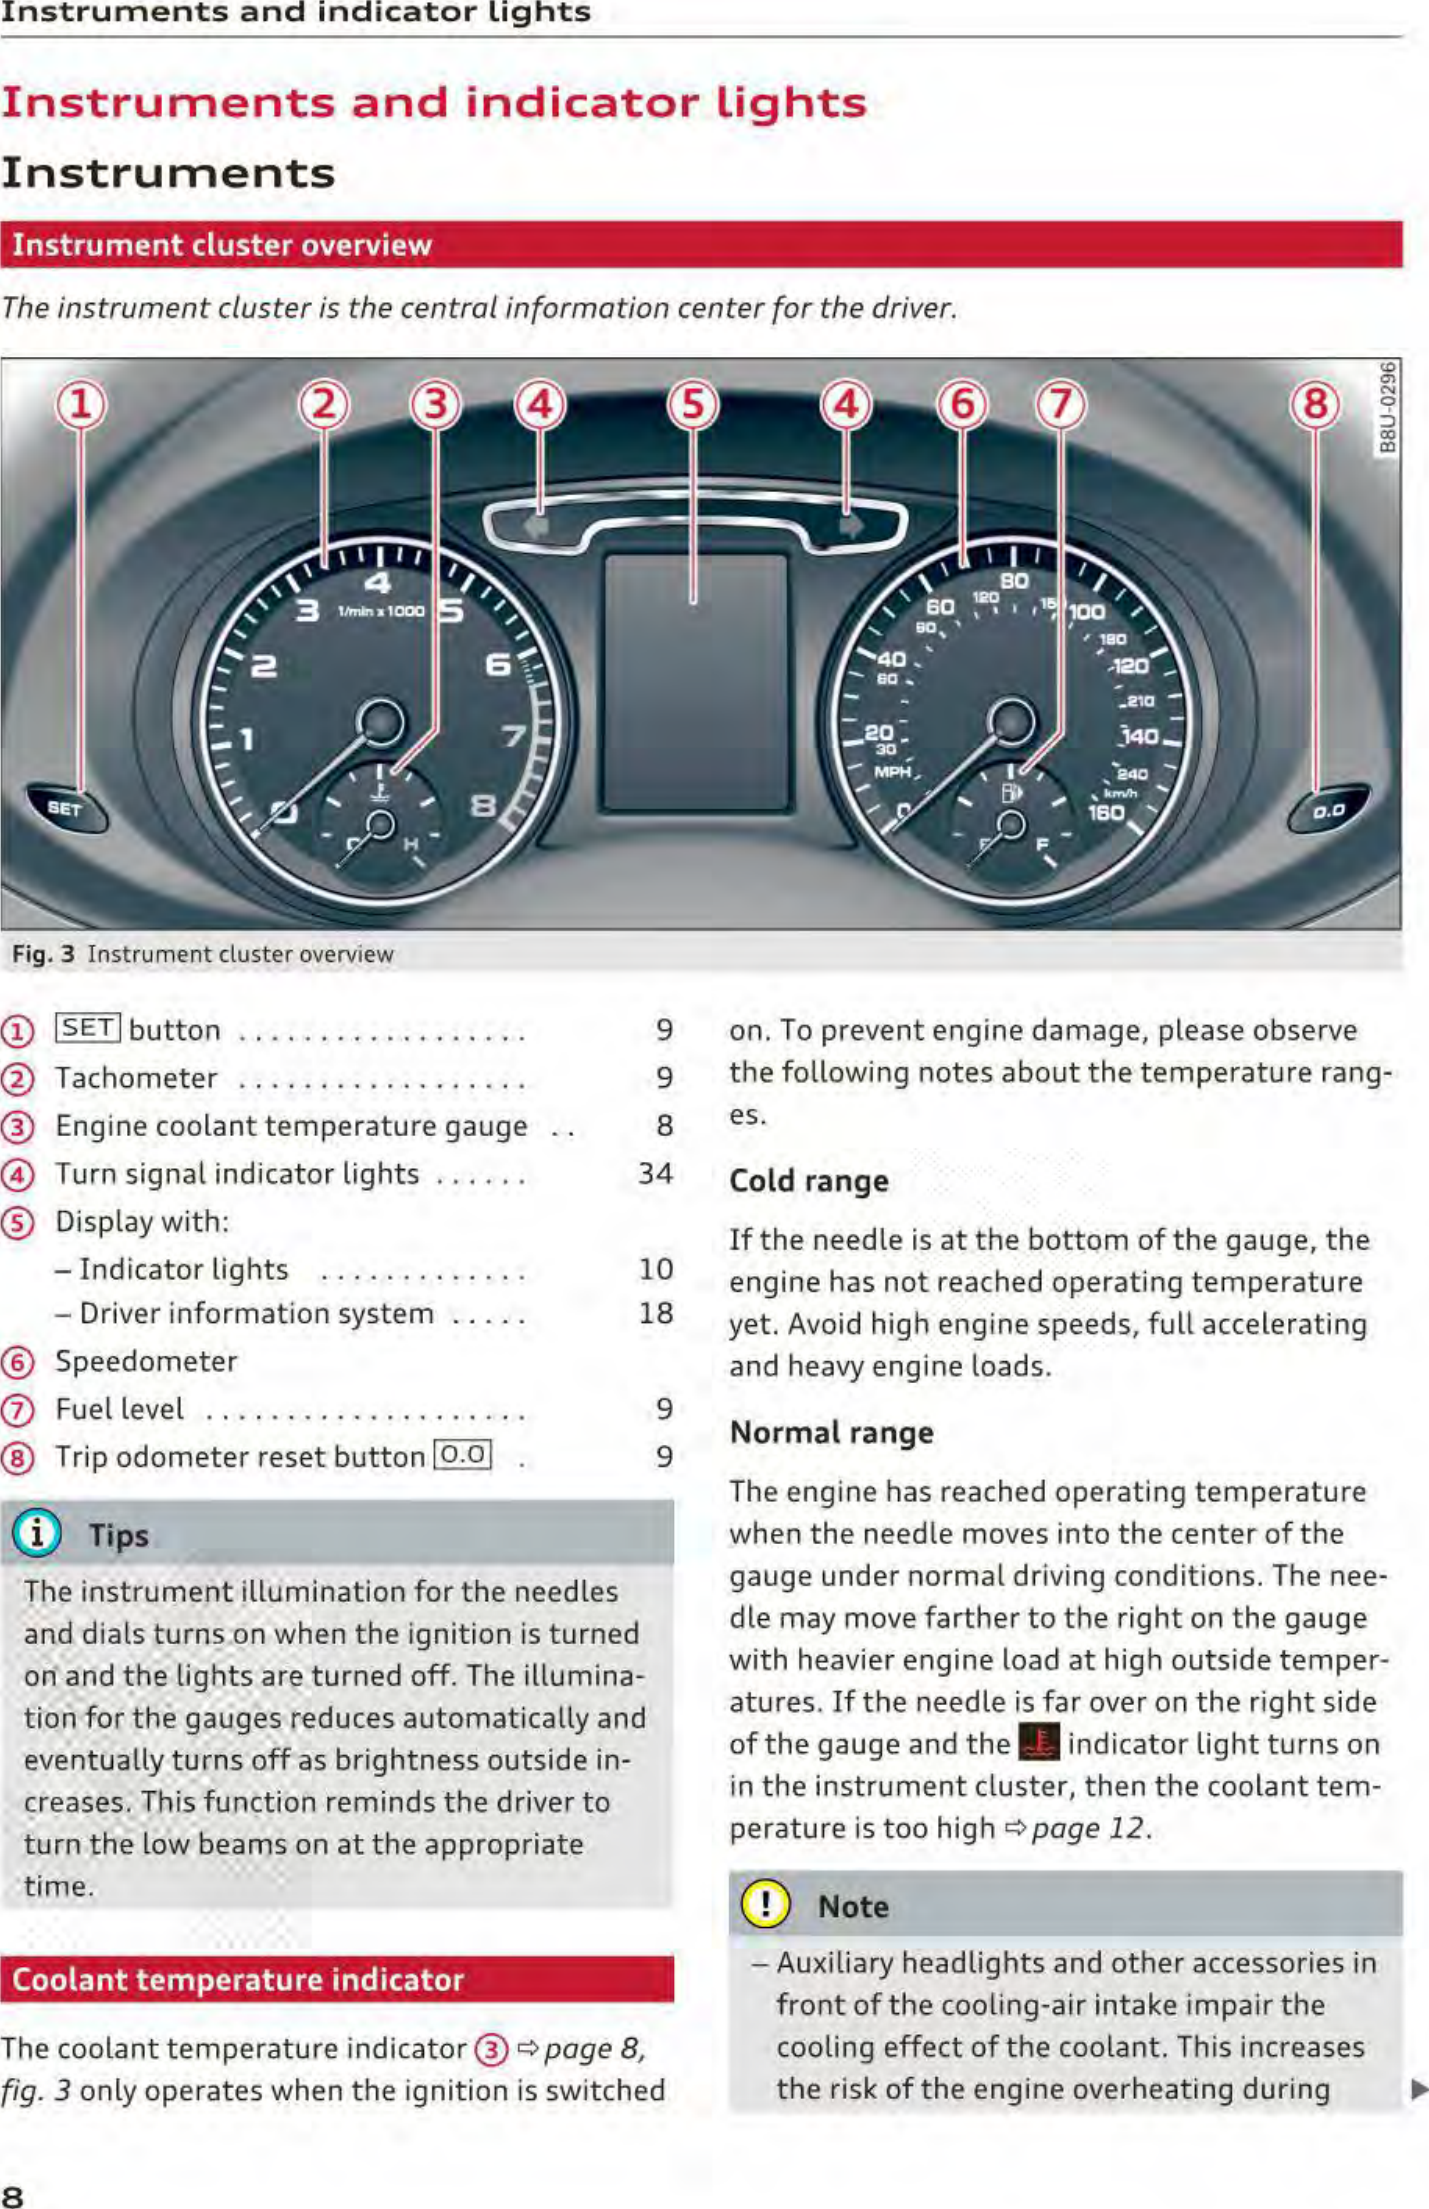 Page 10 of Robert Bosch Car Multimedia AUFPK20 Instrument cluster with immobilizer User Manual part 1